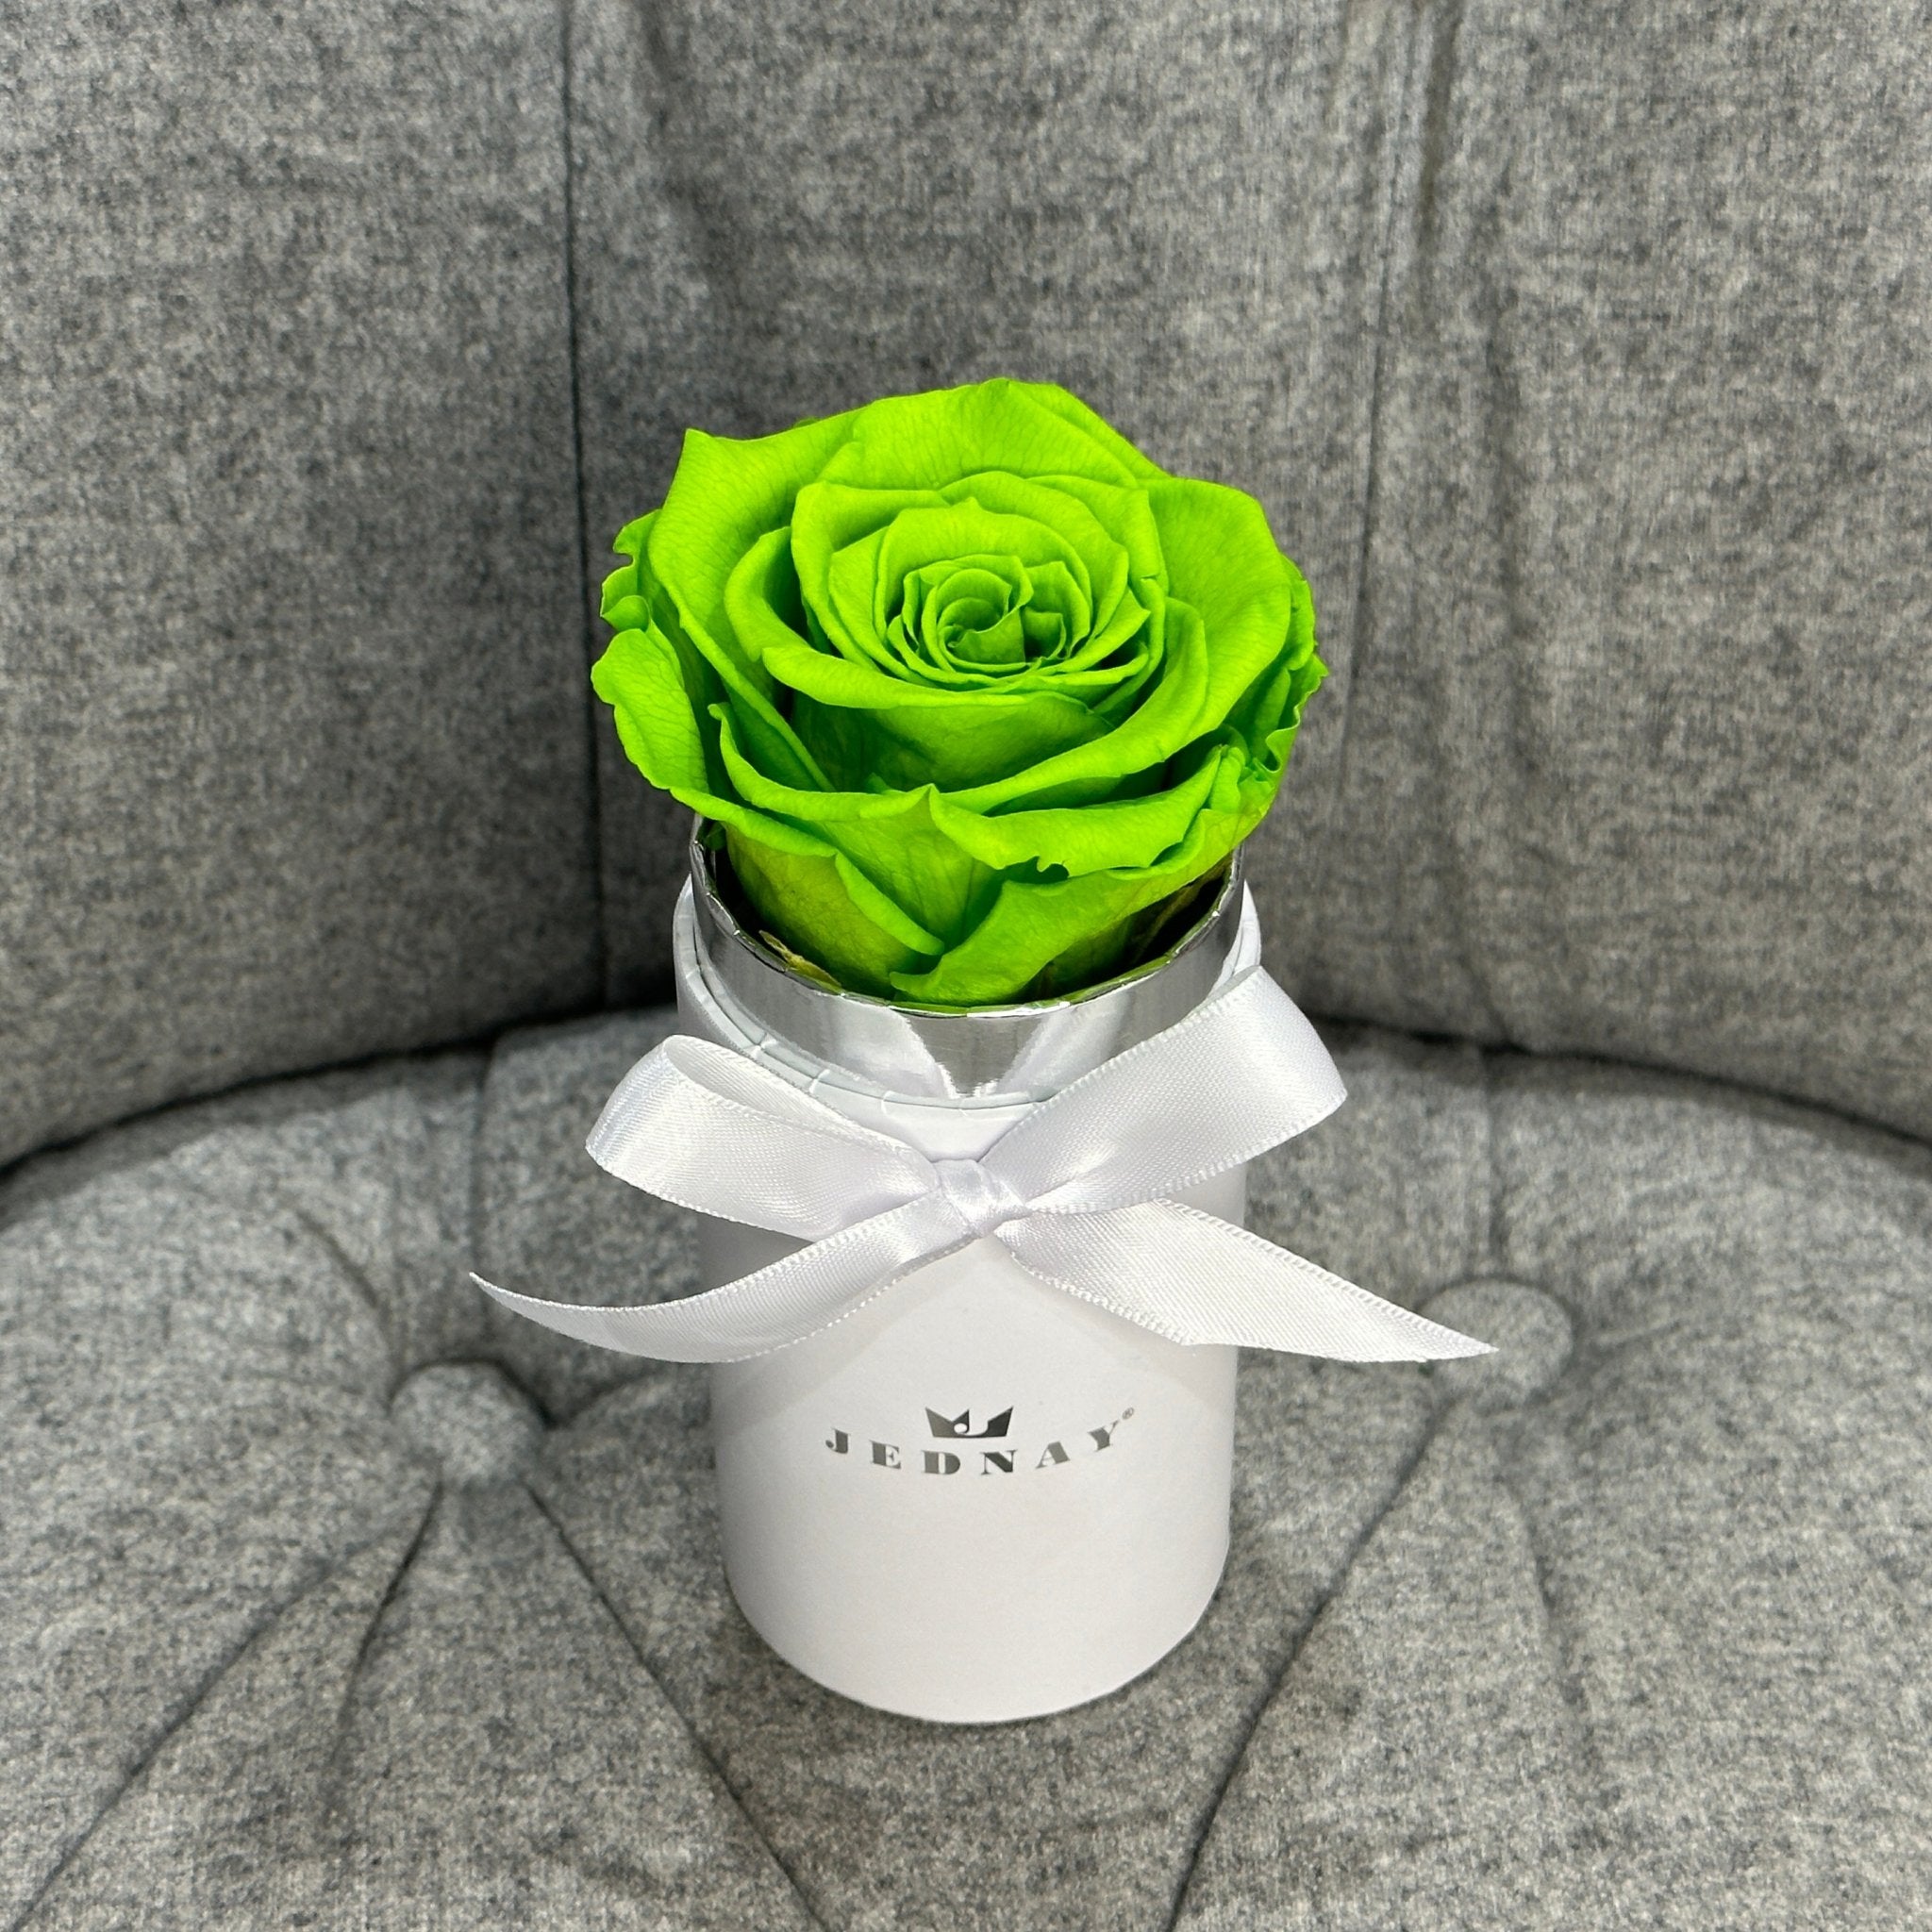 The Uno - Limeade Eternal Rose - Classic White Box - Jednay Roses